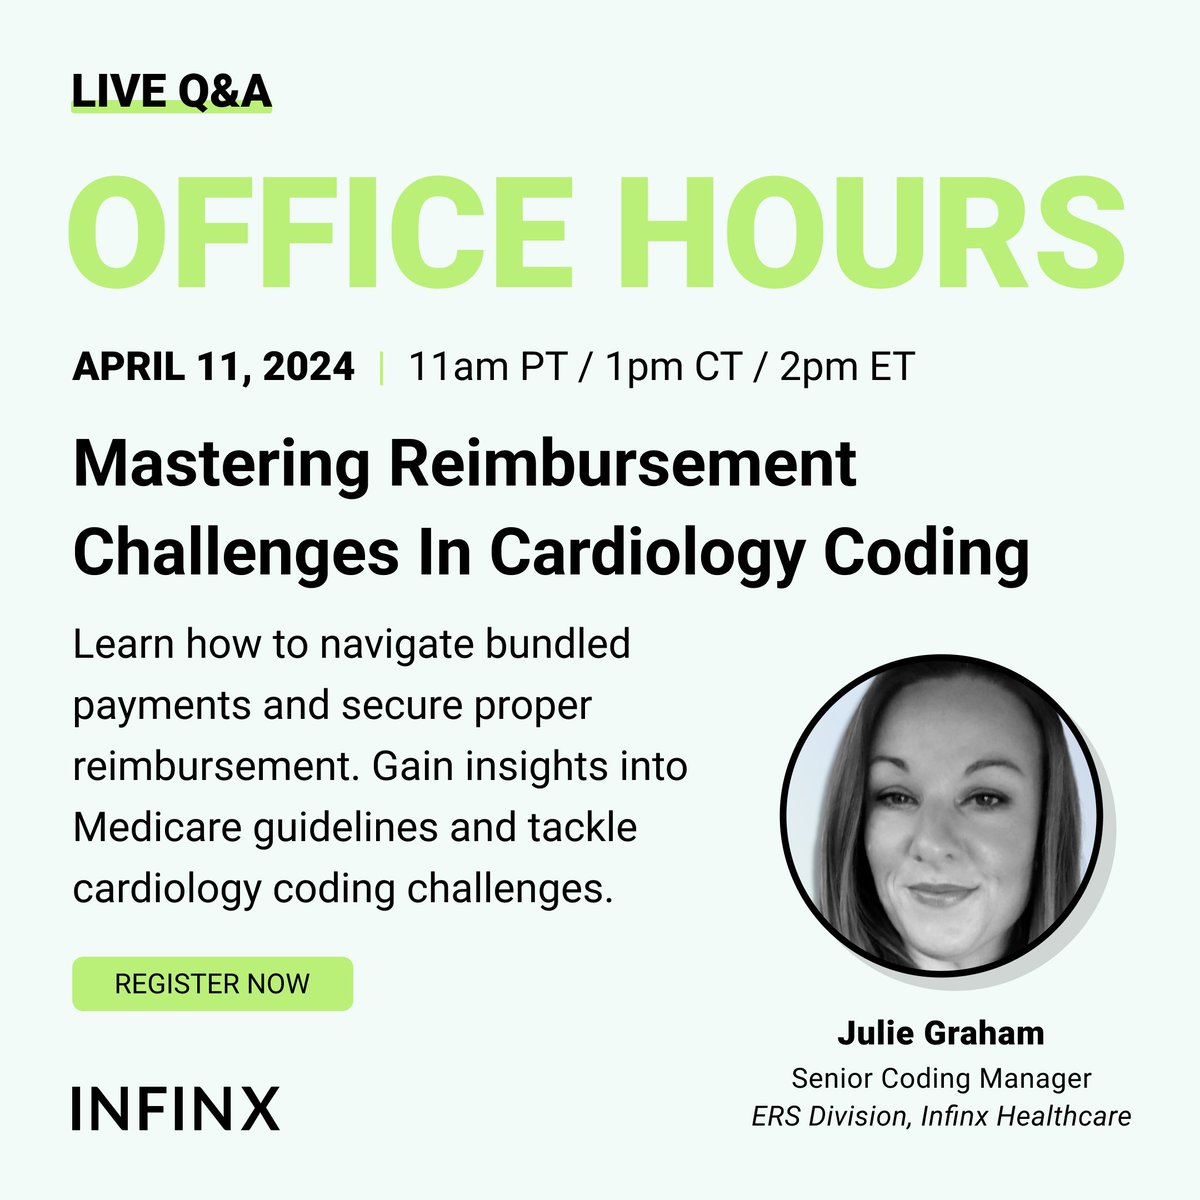 Need help tackling bundled payments for cardiology procedures? In this week’s Office Hours, Julie Graham, Senior Coding Manager at Infinx, covers how to overcome cardiology coding challenges. hubs.li/Q02shVJG0 #CardiologyCoding #RCM #RCMAutomation #HealthcareOperations